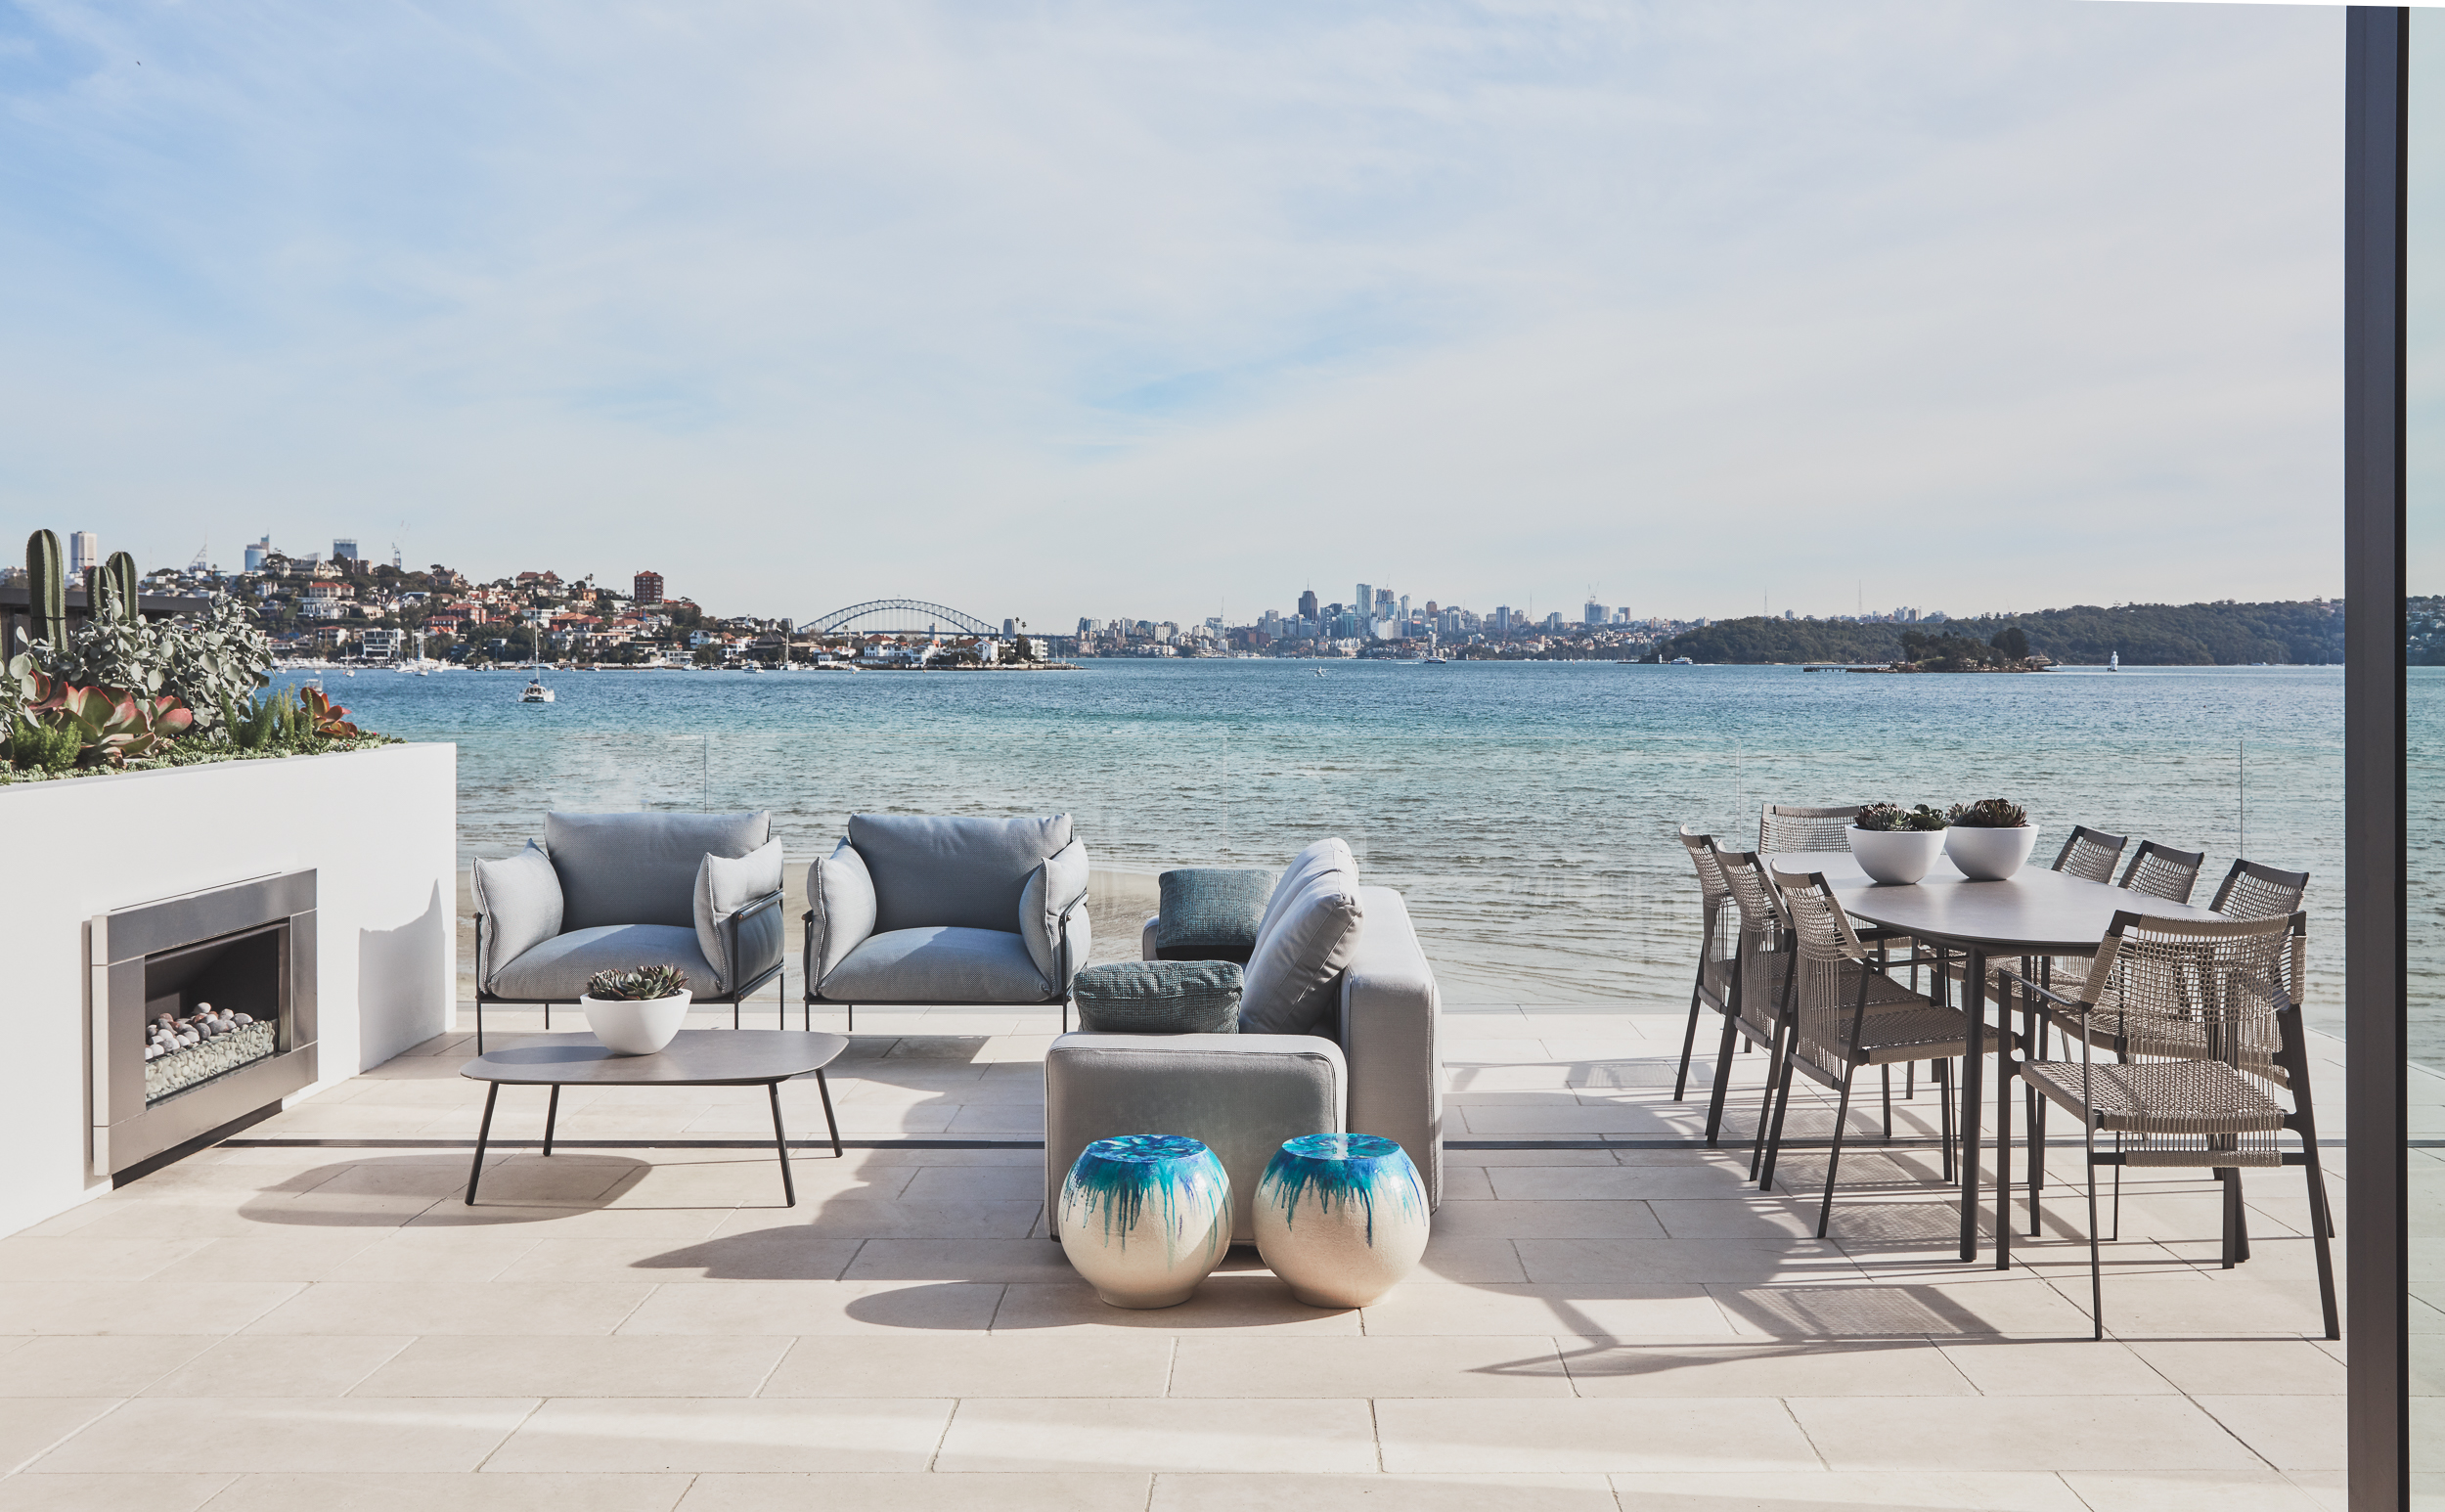 Rose Bay beach penthouse balcony with outdoor fireplace and dining furniture by Sydney interior designers Brendan Wong Design